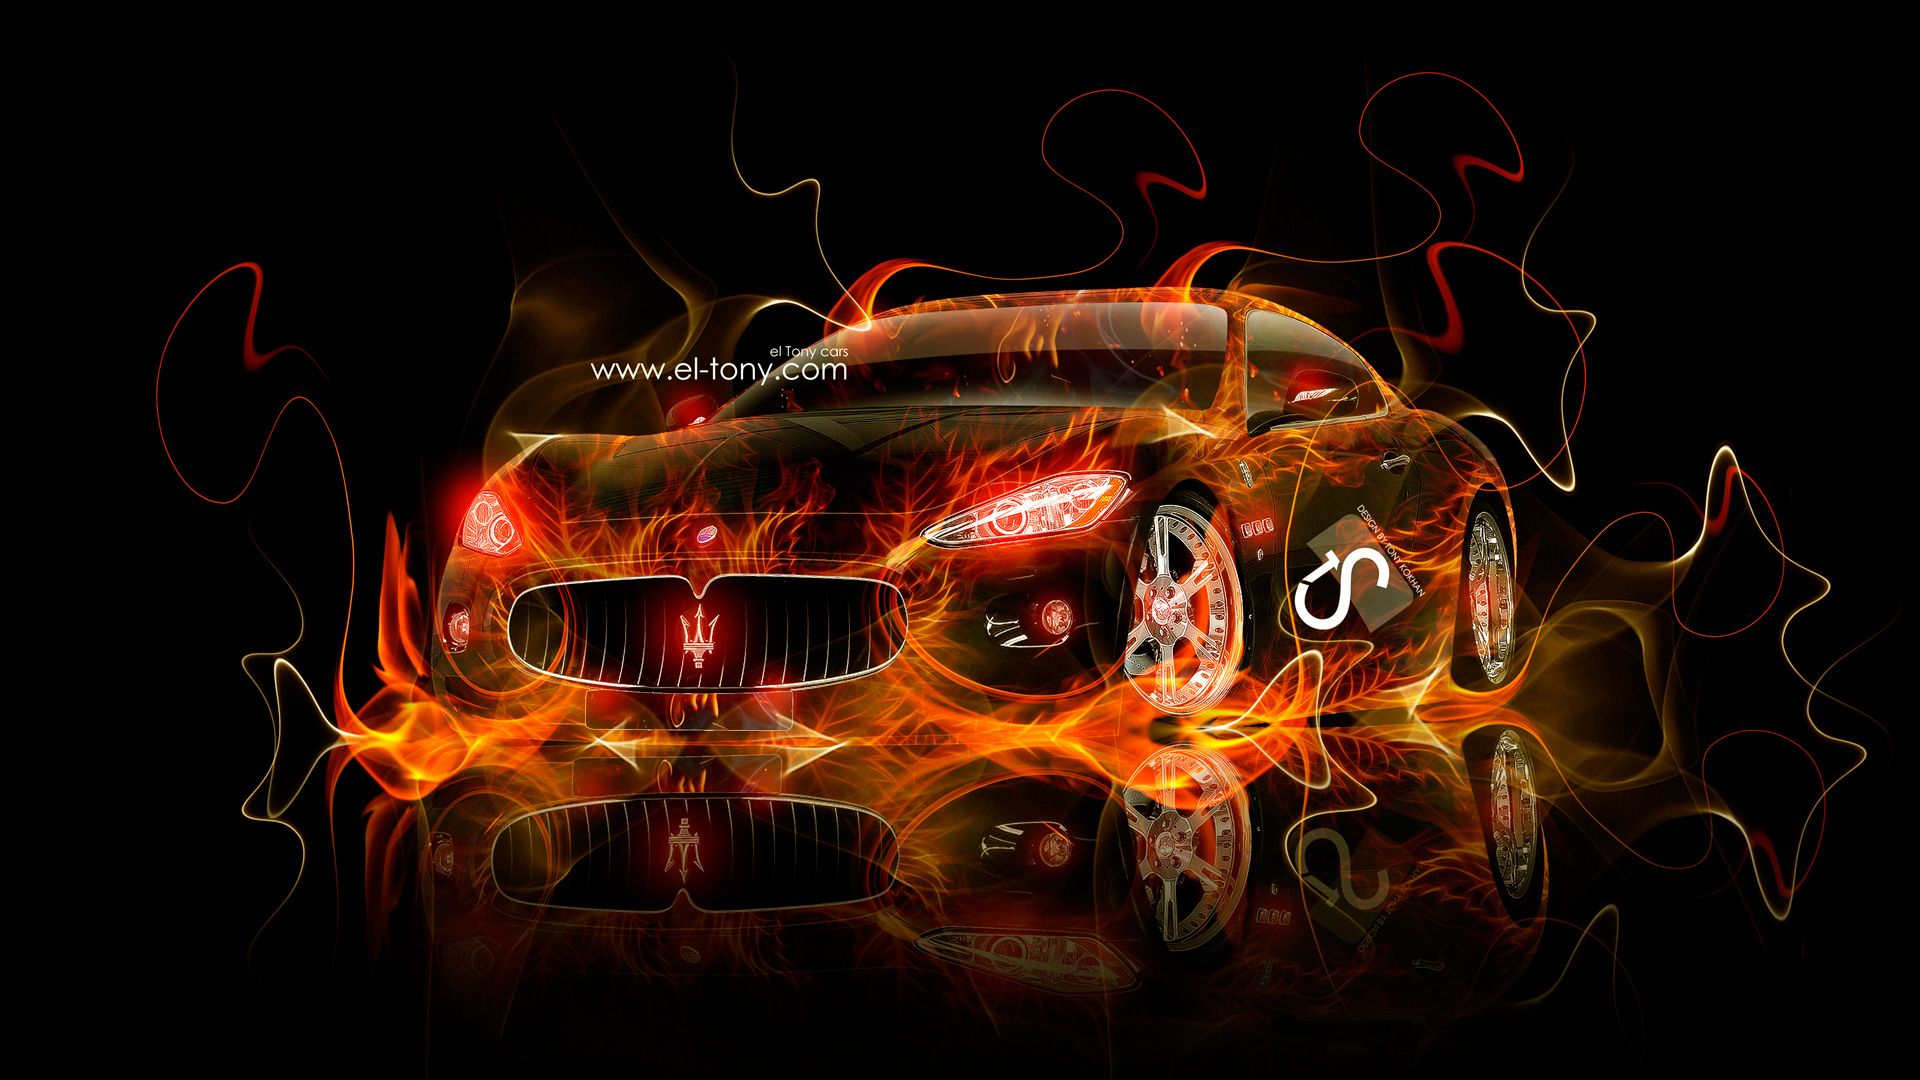 Free download Maserati Granturismo Fire Car 2013 HD Wallpaper design by Tony Kokhan [1920x1080] for your Desktop, Mobile & Tablet. Explore Car Wallpaper for Fire. Cool Fire Wallpaper, Free